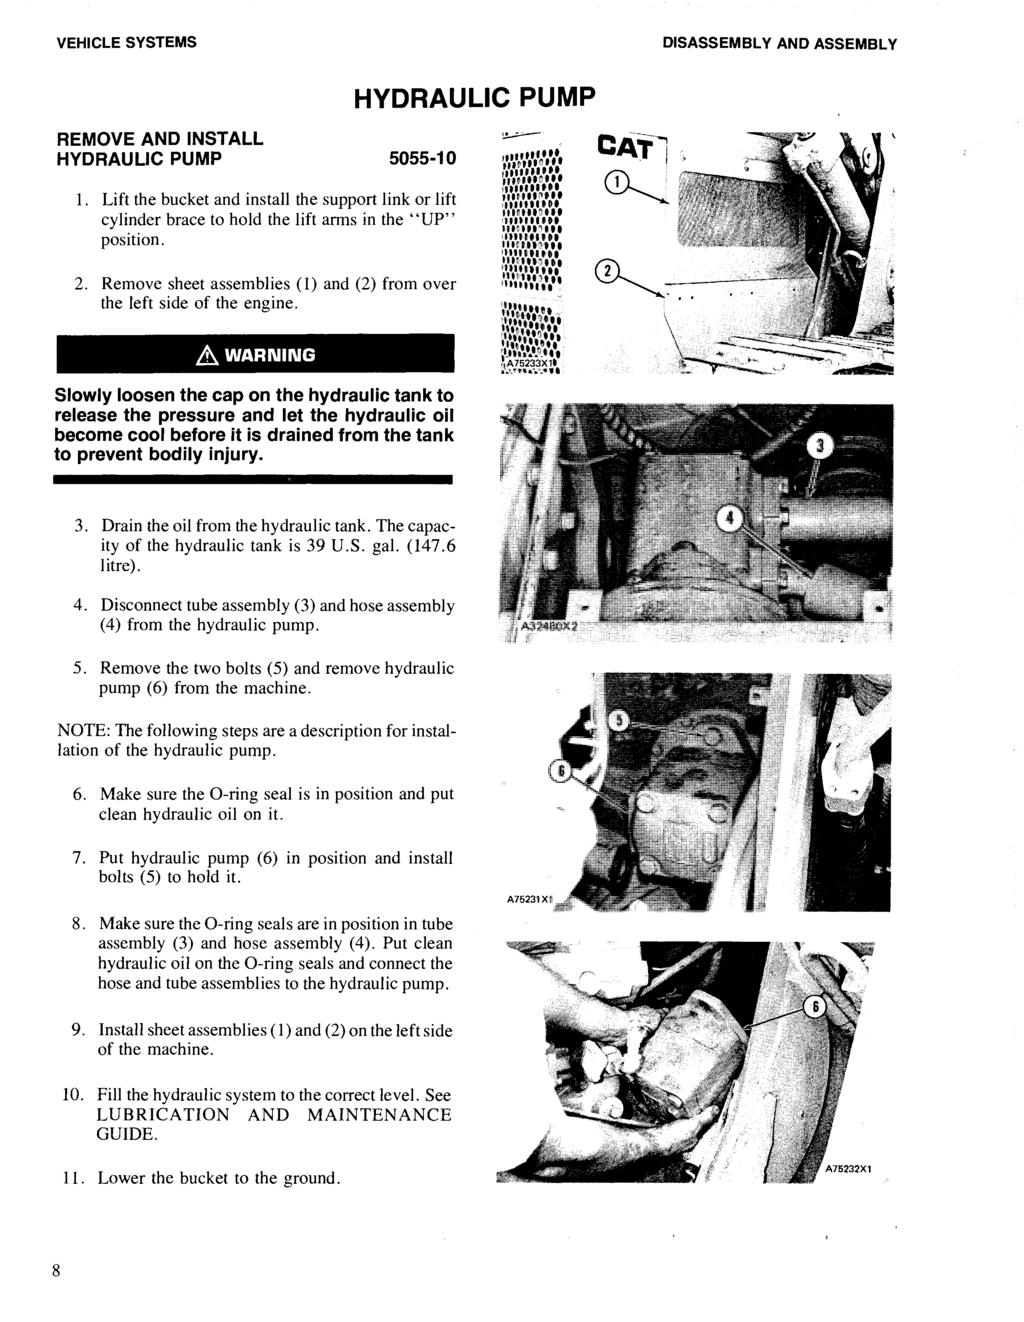 VEHICLE SYSTEMS DISASSEMBLY AND ASSEMBLY REMOVE AND INSTALL HYDRAULIC PUMP 5055-10 1. Lift the bucket and install the support link or lift cylinder brace to hold the lift arms in the "up" position. 2.